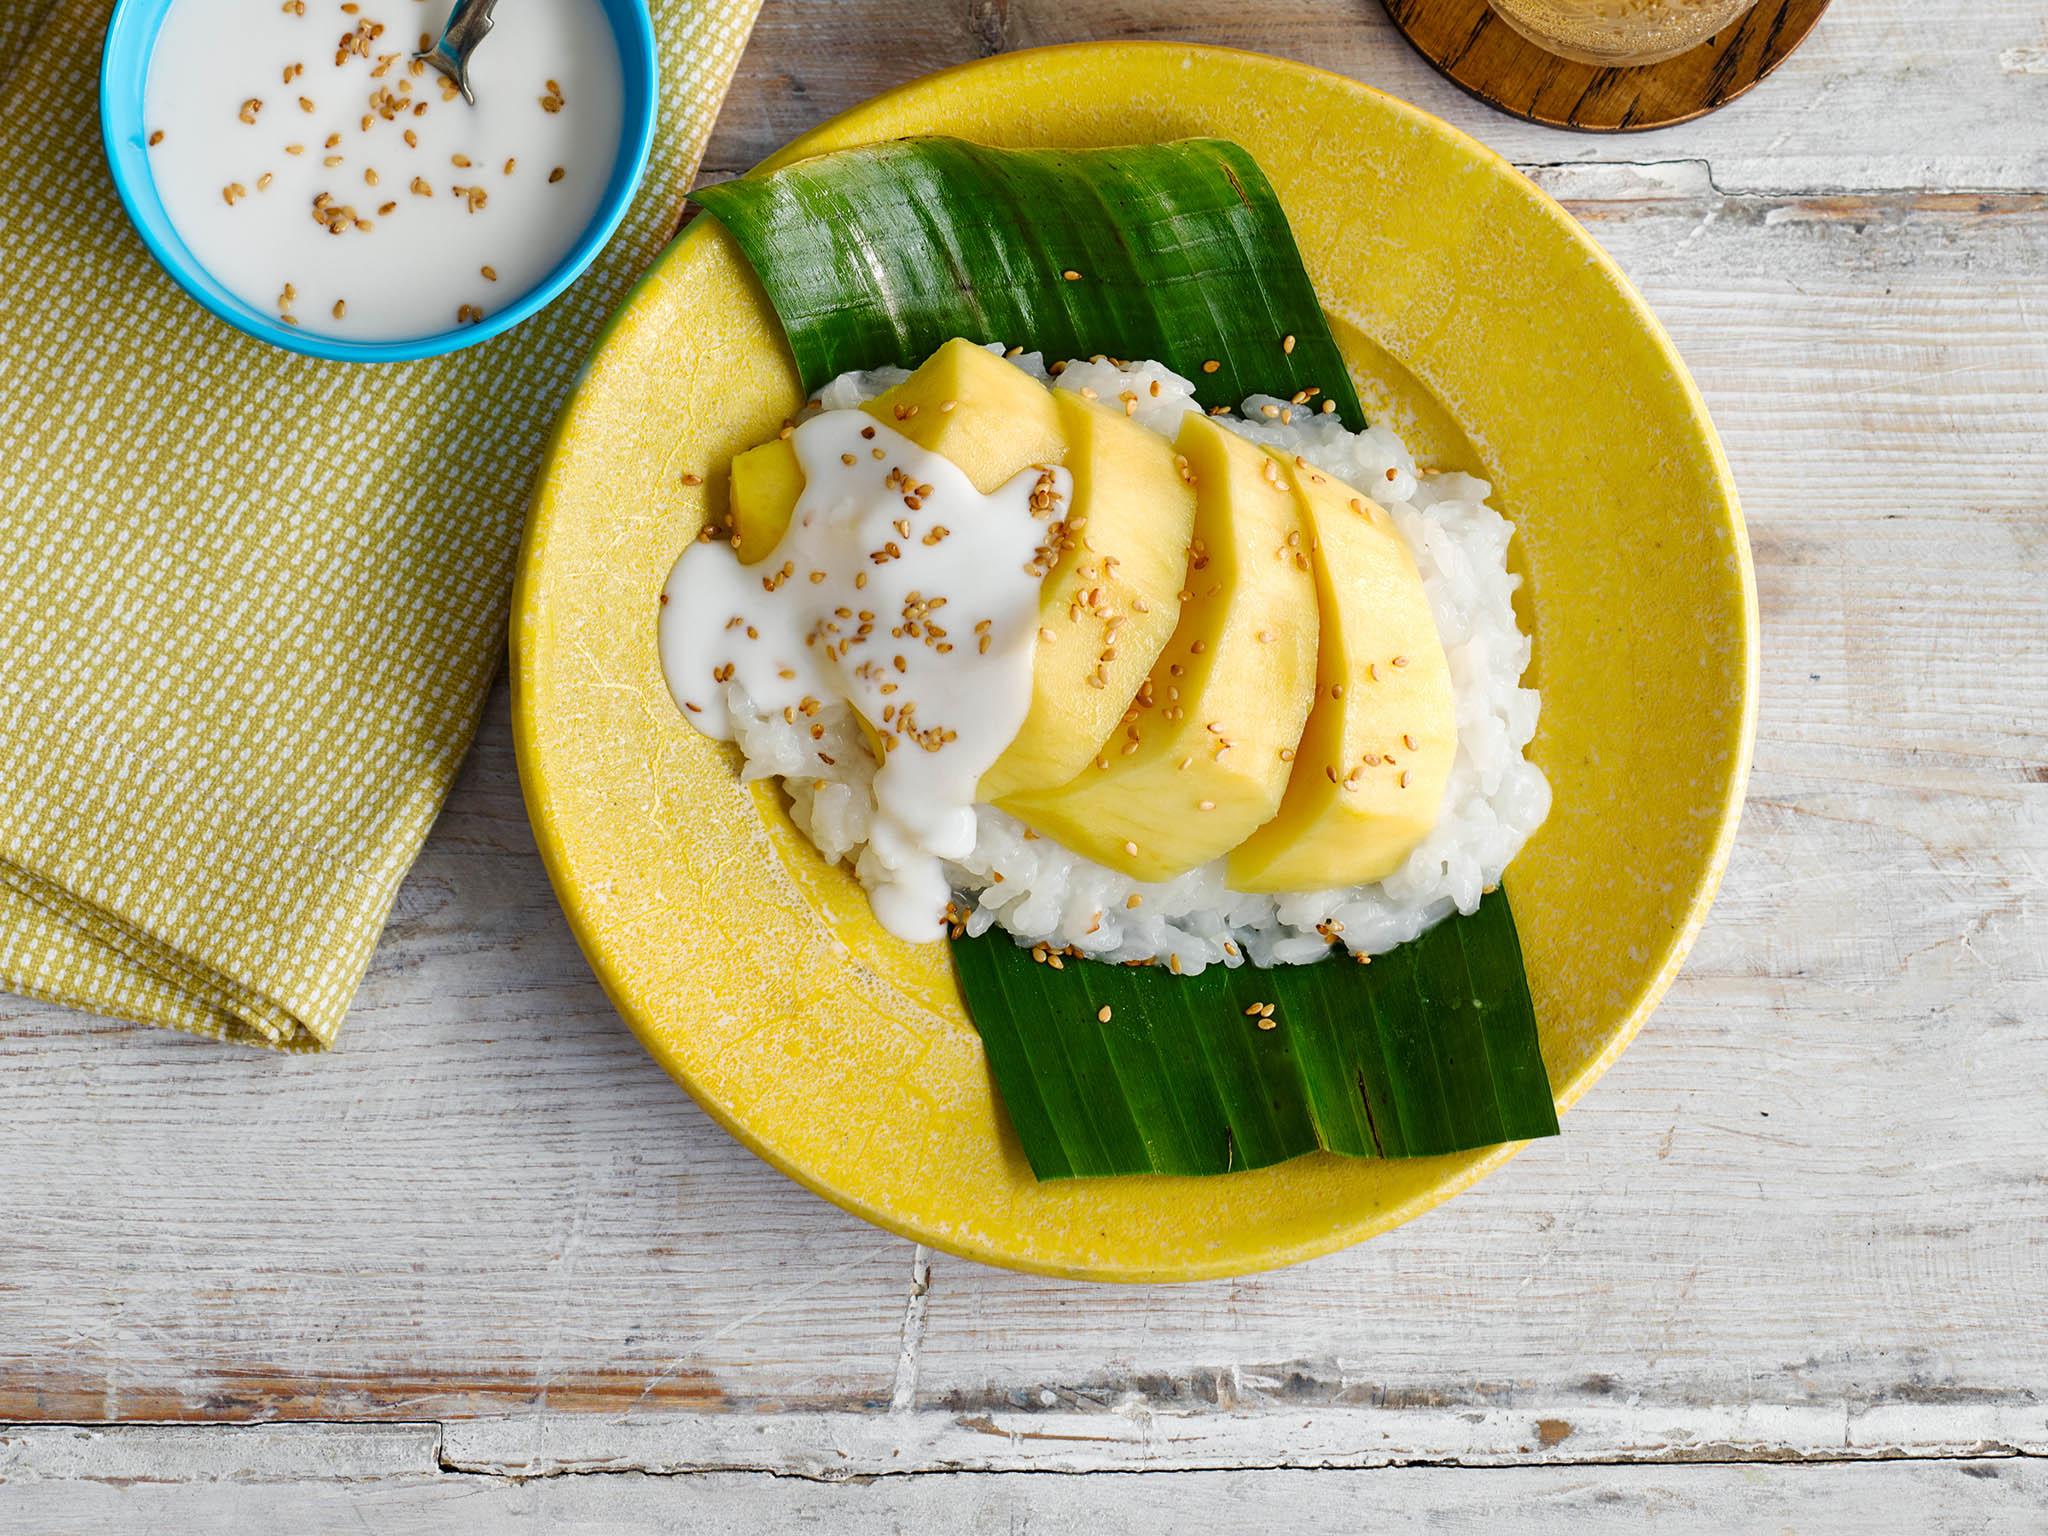 Serve sweet rice and mango with a main course for a festive treat